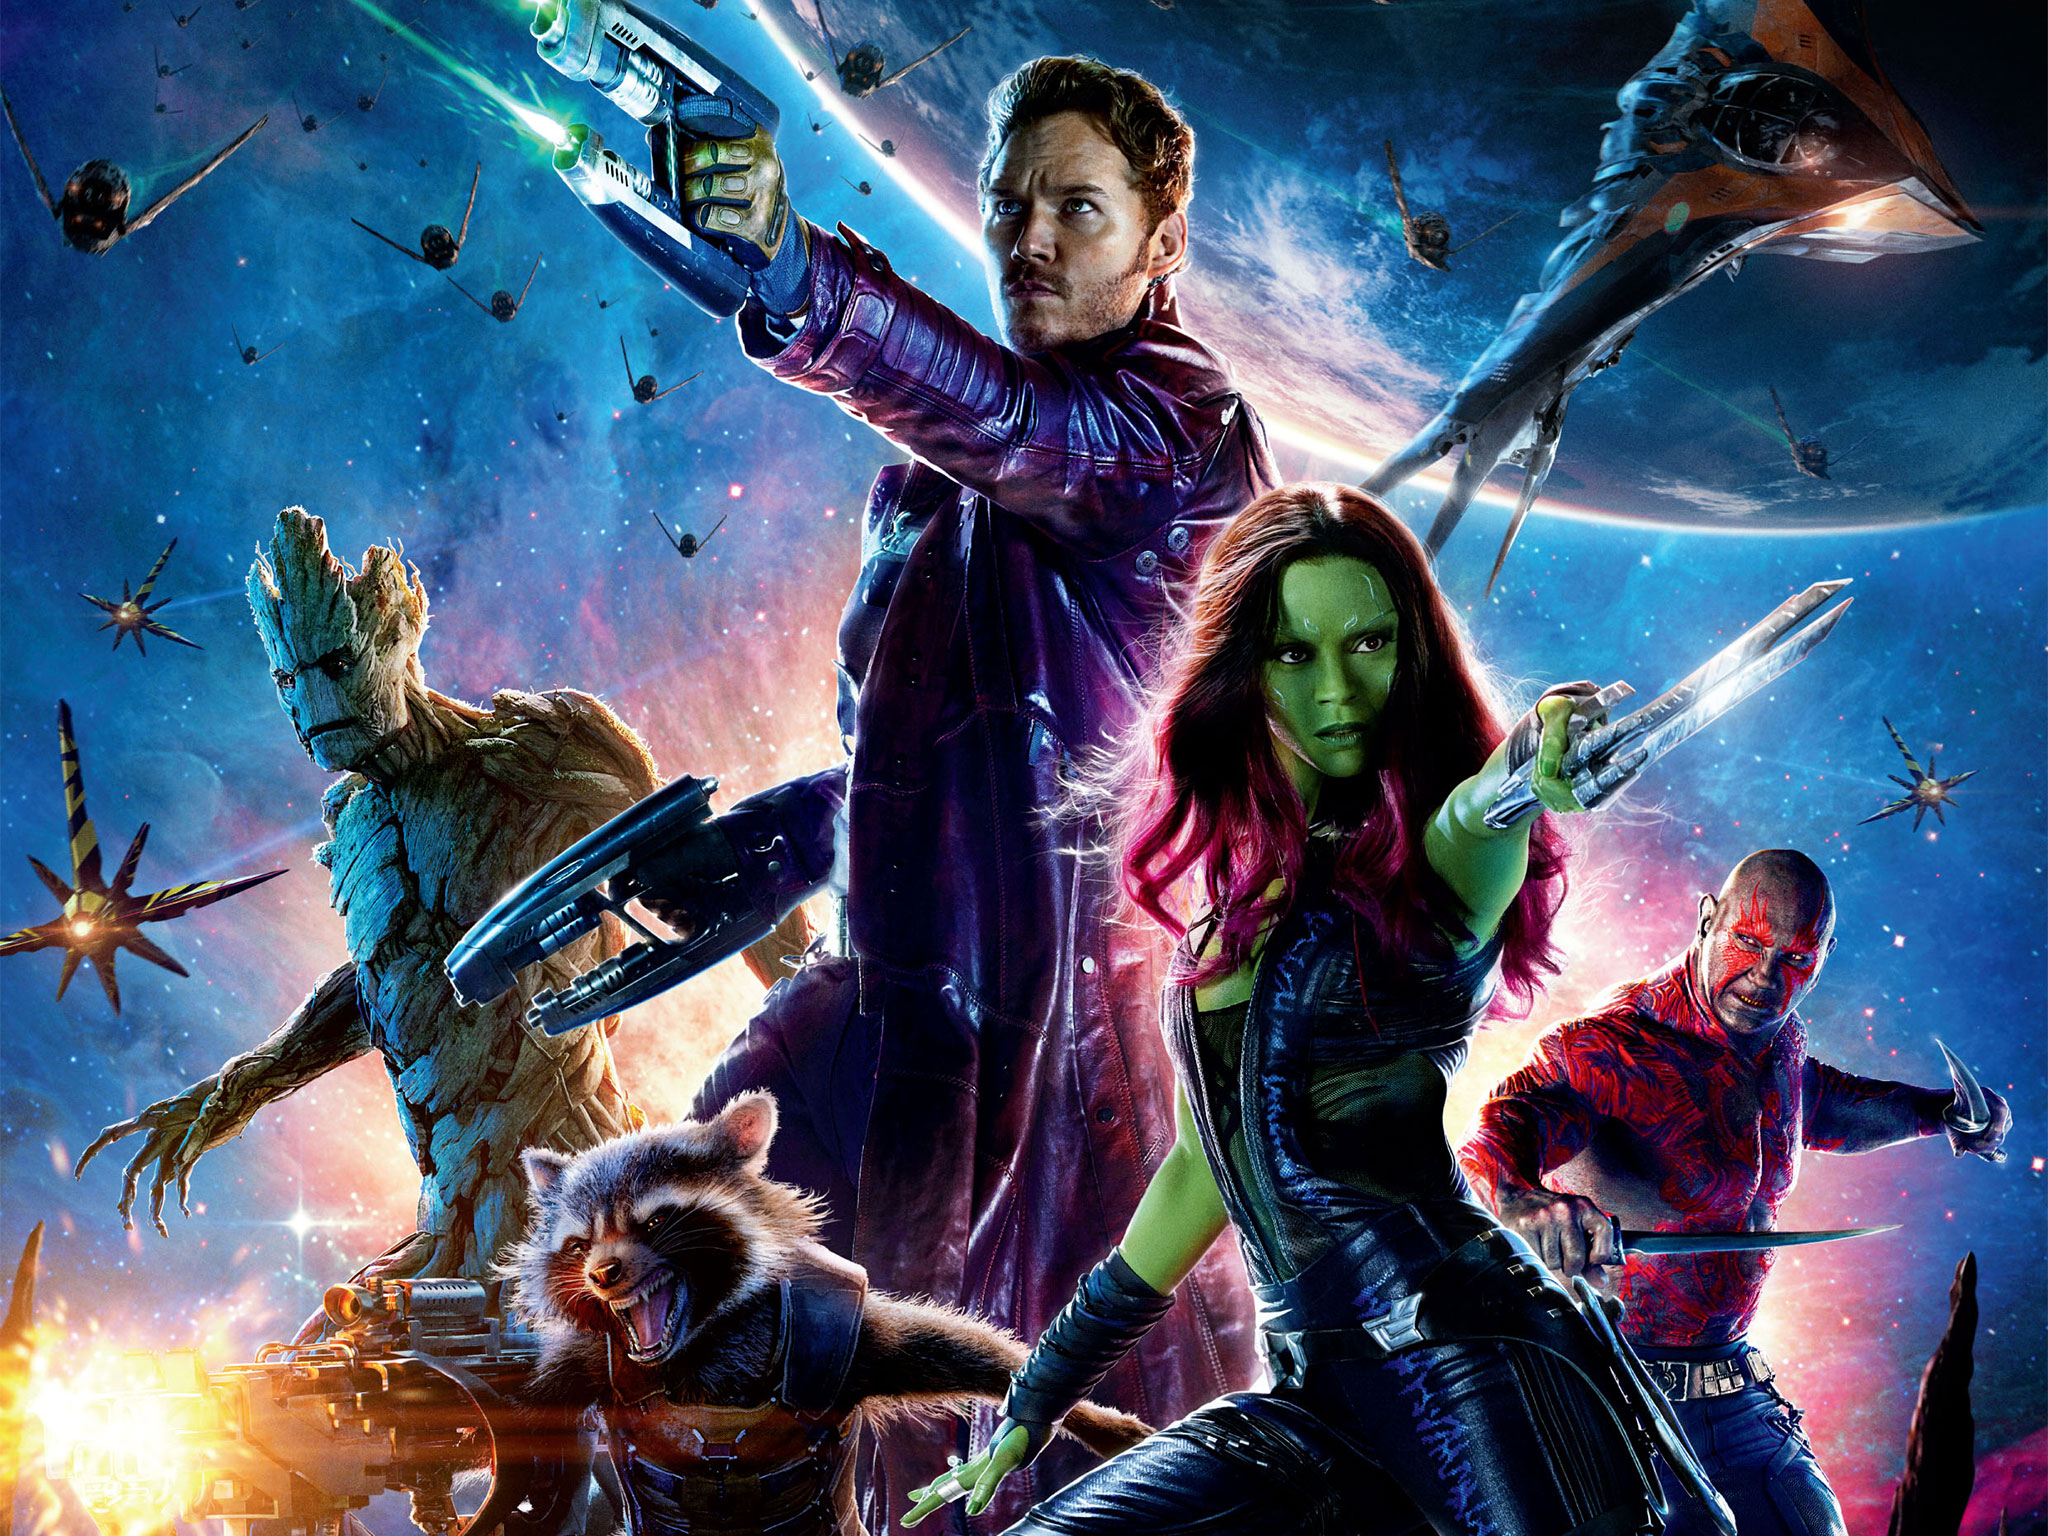 guardians_of_the_galaxy_poster.jpg